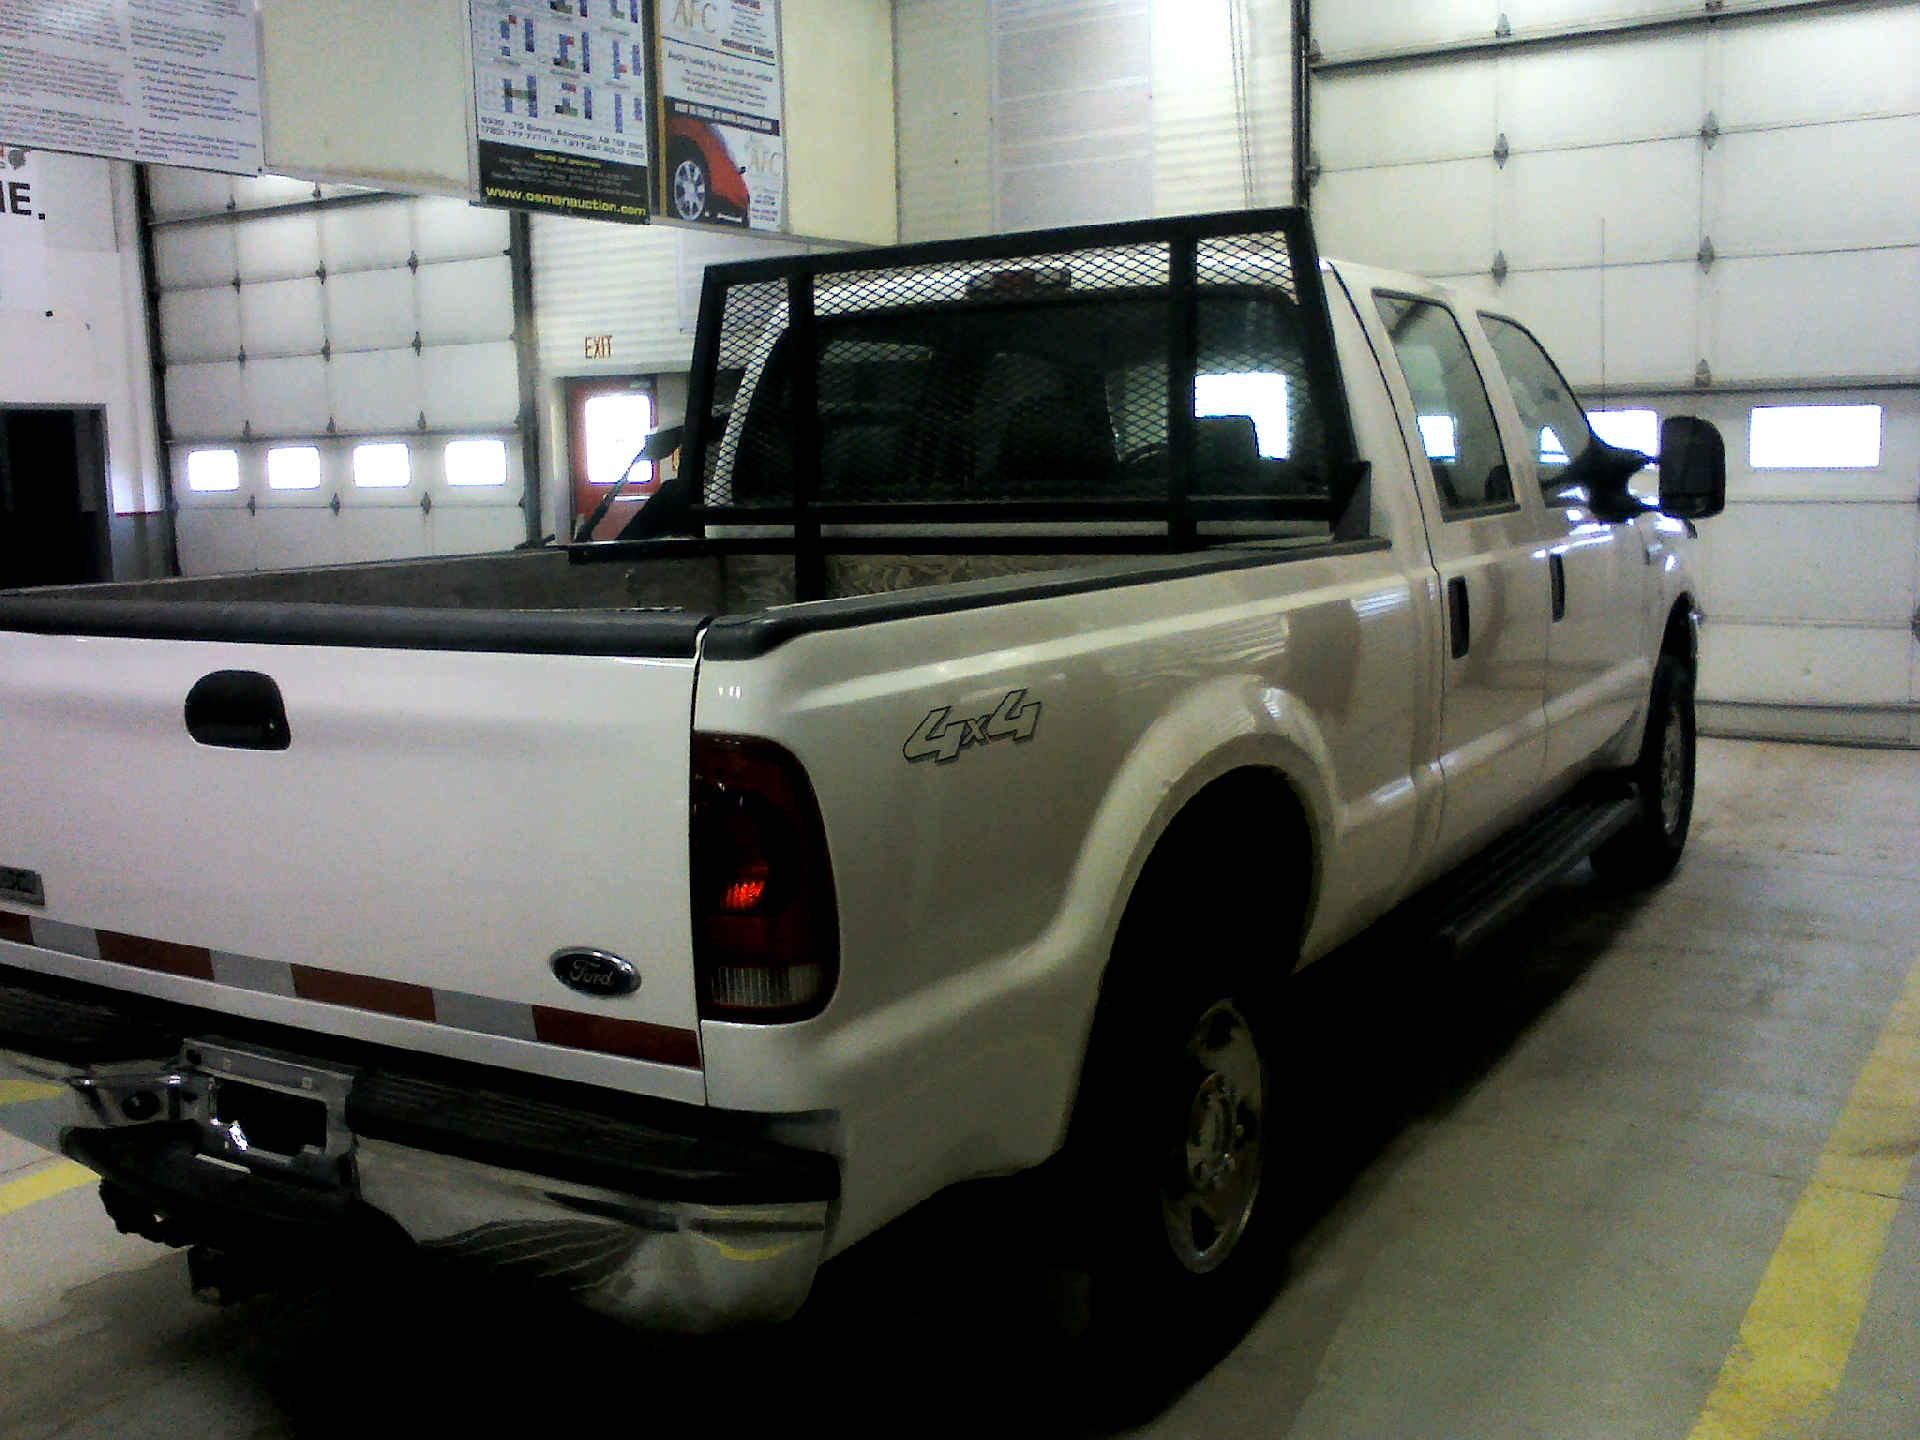 2006 FORD F-250 SD XLT CREW CAB 4WD 5.4L V8 SOHC 16V AUTOMATIC SN:1FTSW21556ED34193 OPTIONS:AC TW CC - Image 4 of 10